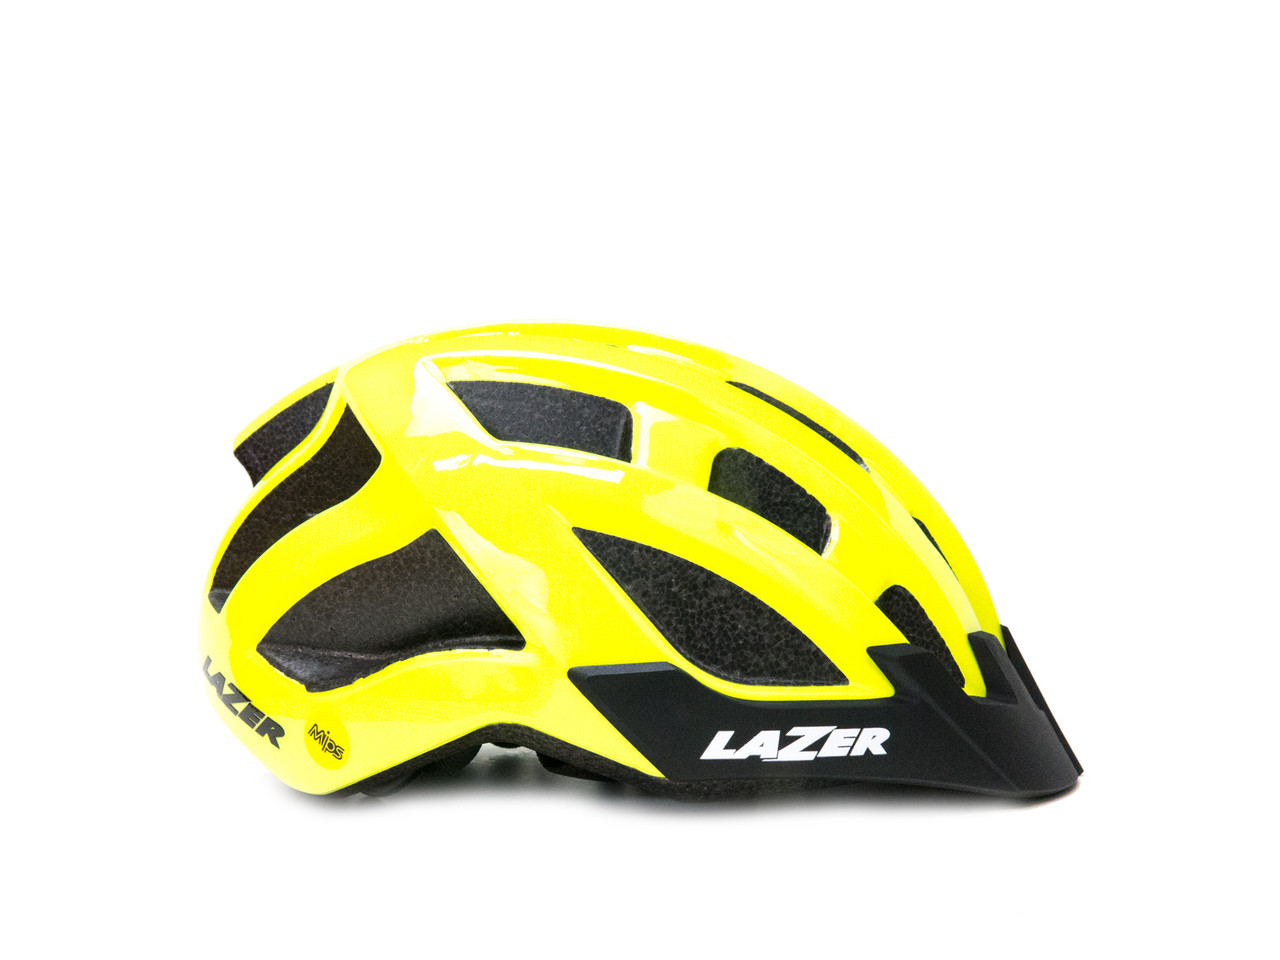 DLX MIPS Helmet 2019 - BikeShoes.com - Free 3 day shipping orders over $50